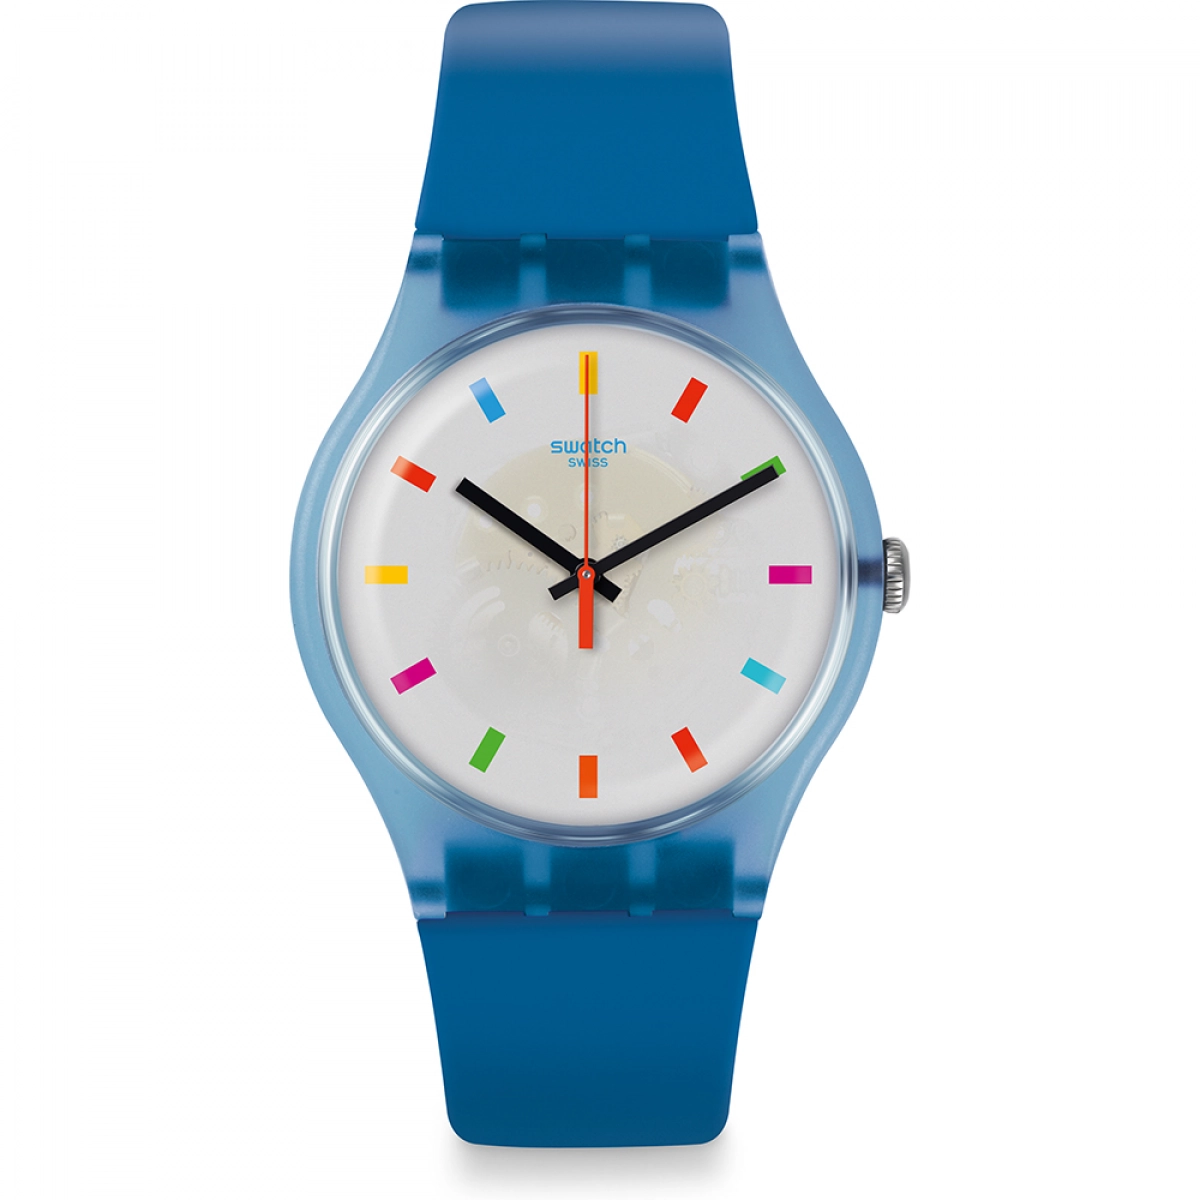 WATCH BLUE COLOR SQUARE SUON125 SWATCH